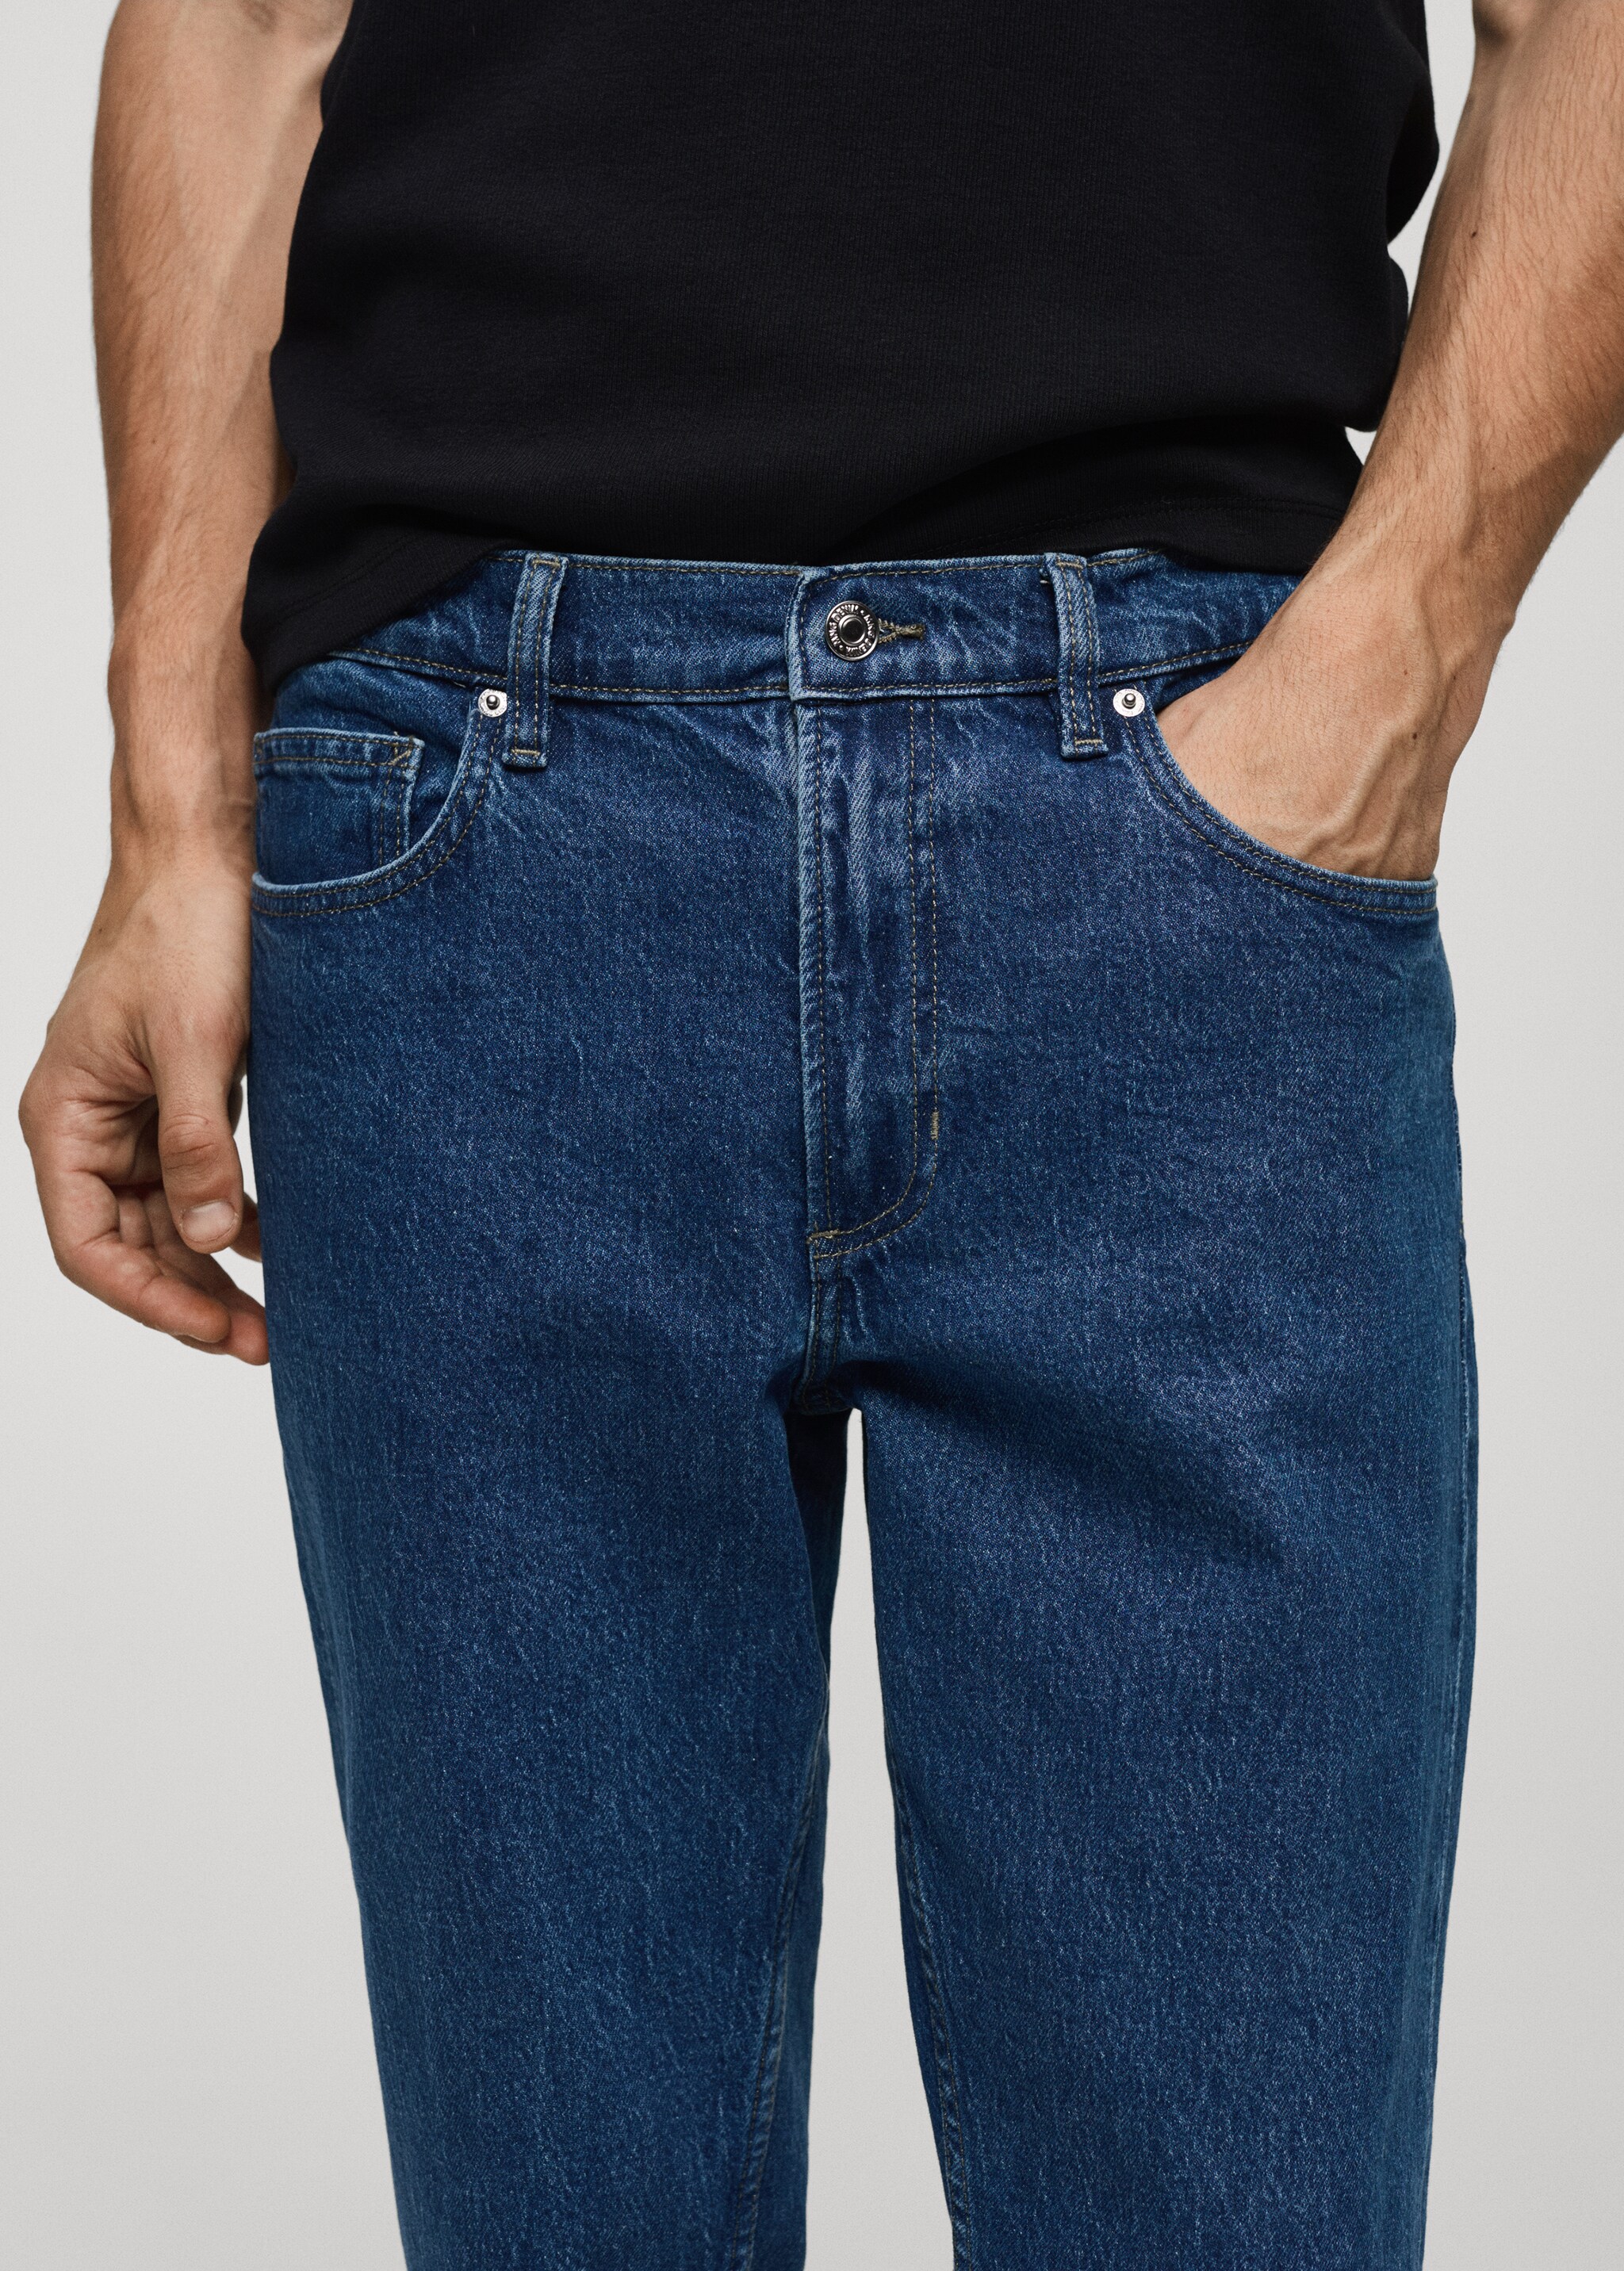 Ben tapered fit jeans - Details of the article 1